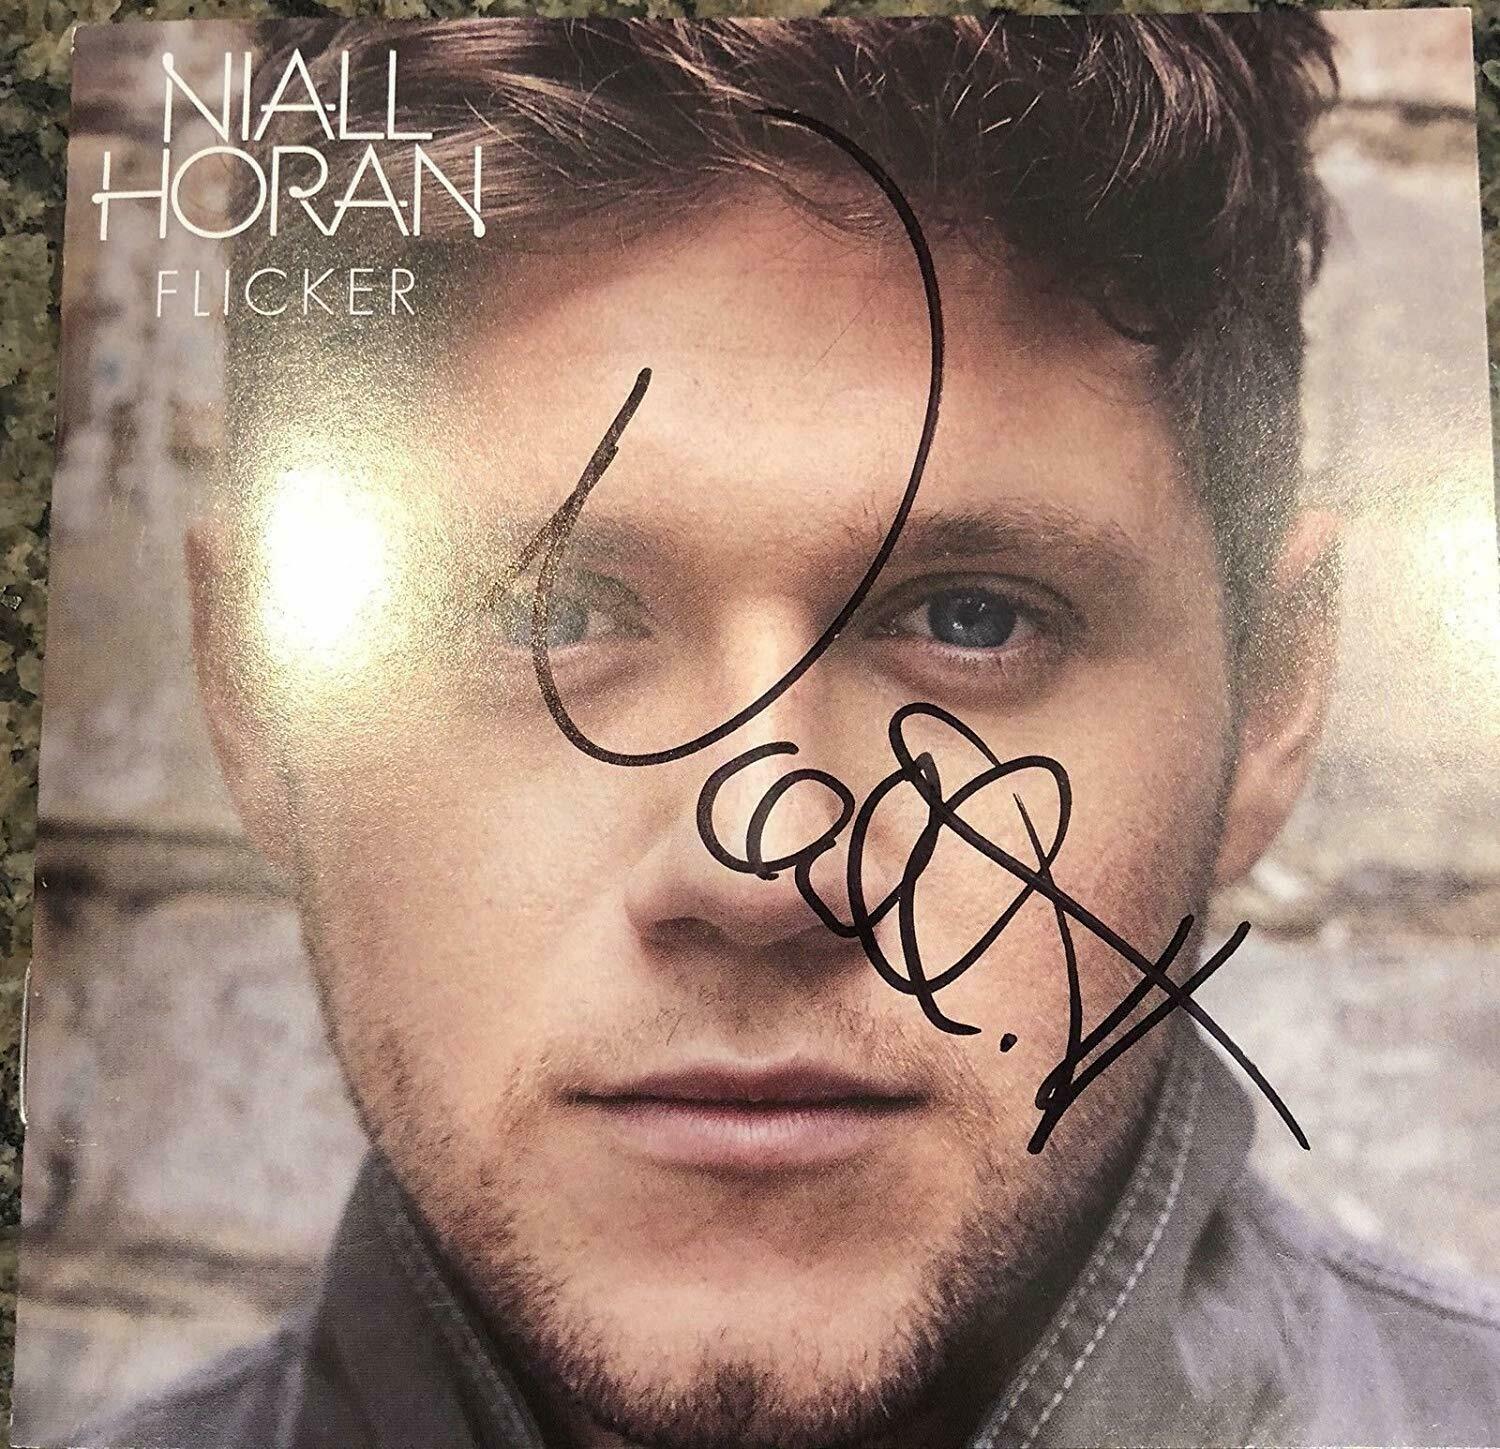 Niall Horan Autographed CD